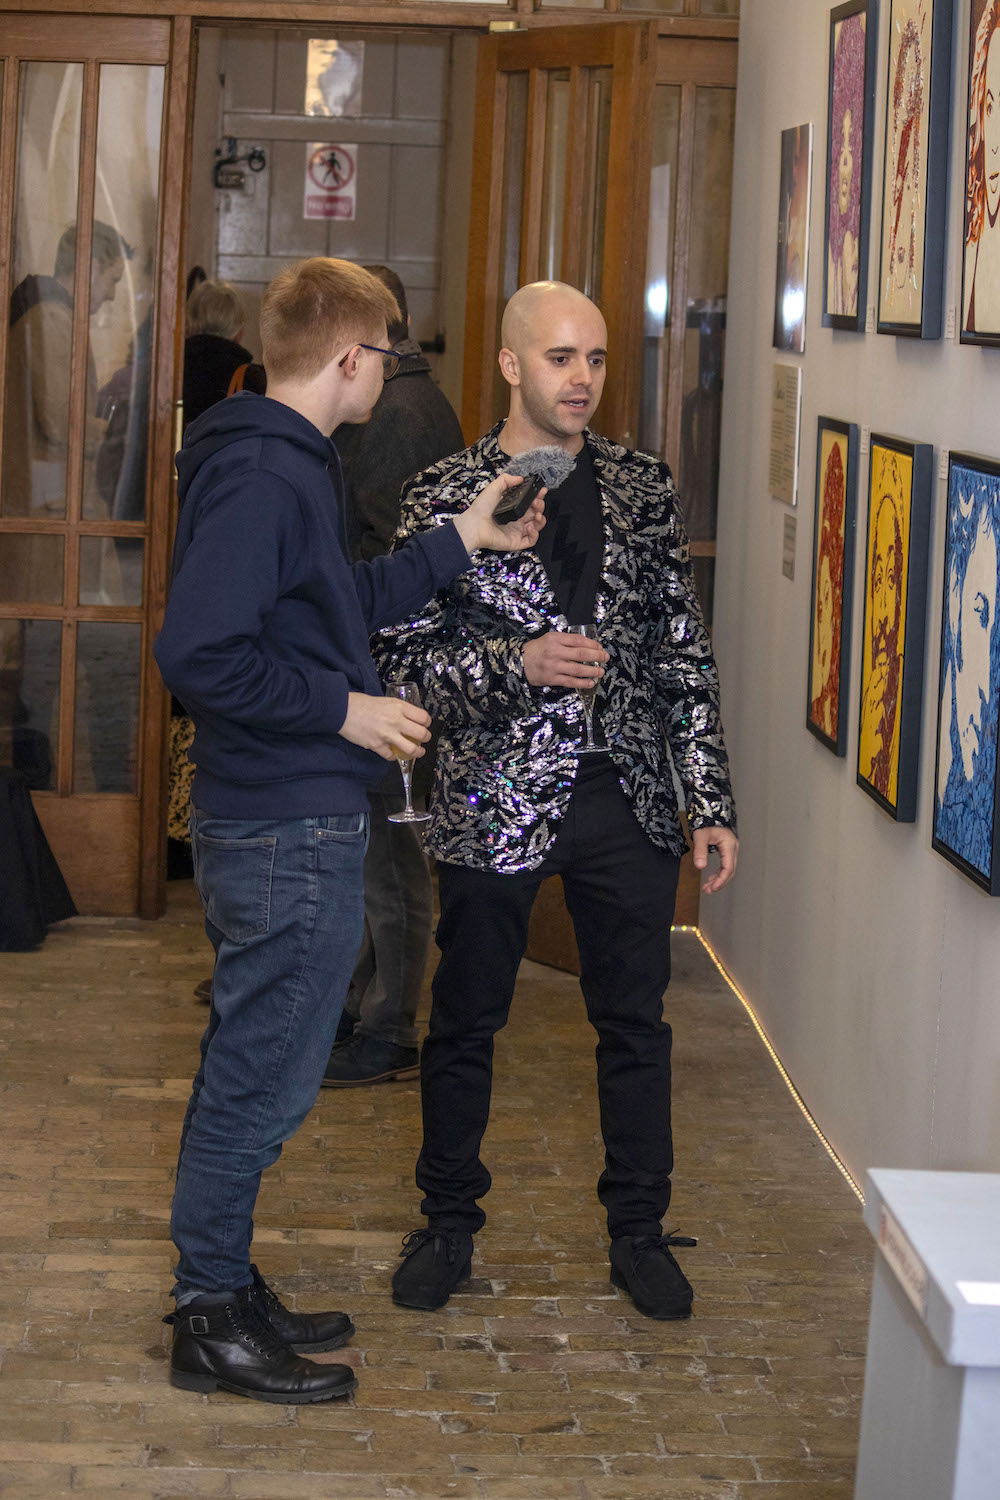 Kerwin Blackburn interviewed by BBC Radio Norfolk while exhibiting his Jackson Pollock-inspired pop art music paintings at the Crypt Gallery at Norwich School in Norfolk, February-March 2022 | By Kerwin